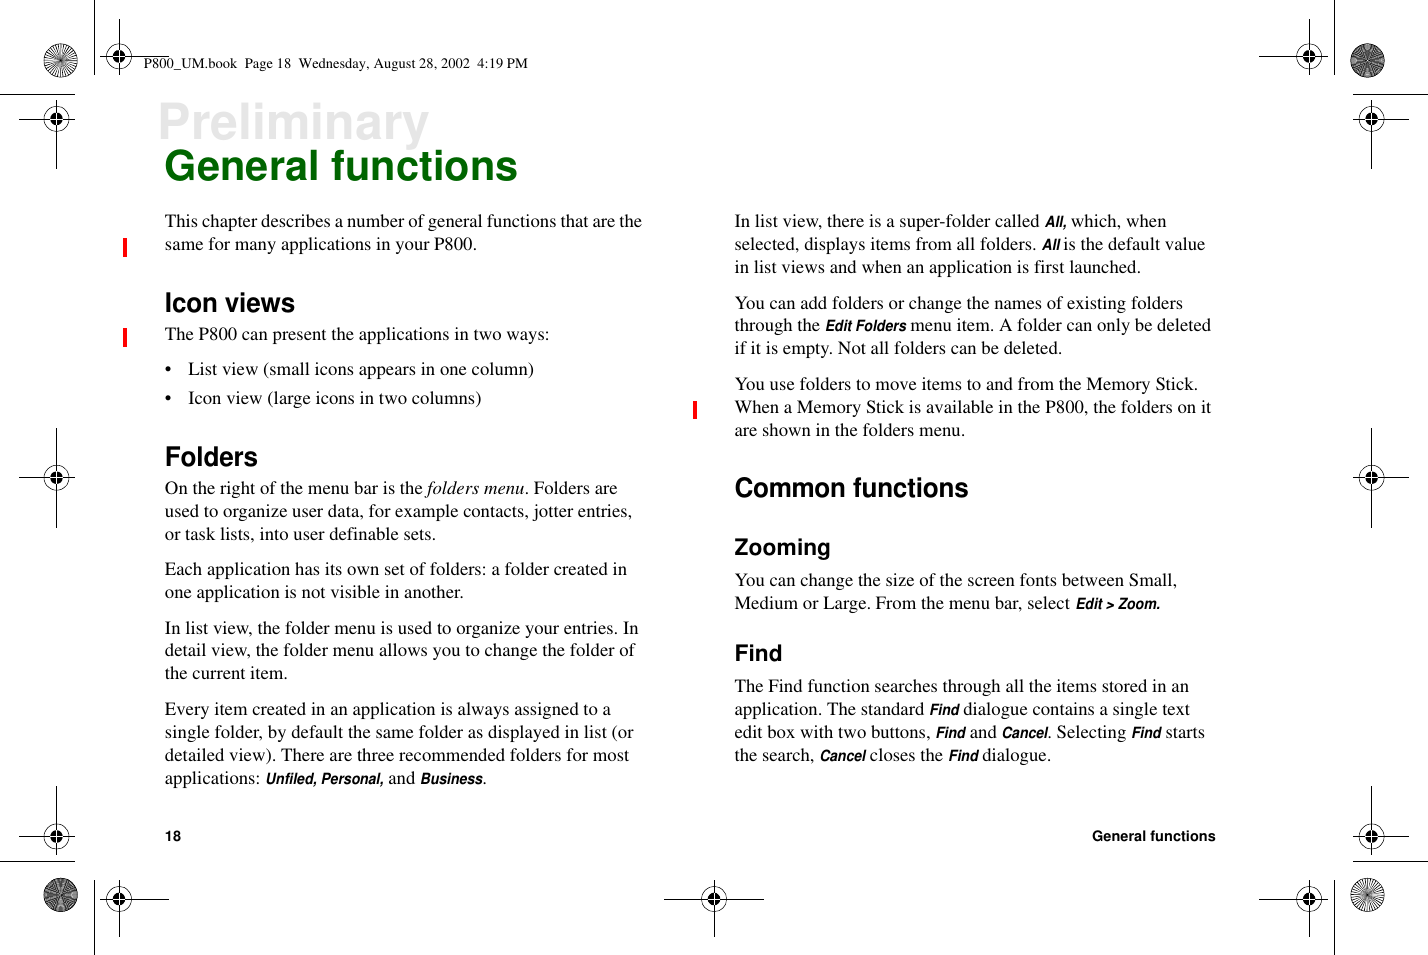 18 General functionsPreliminaryGeneral functionsThis chapter describes a number of general functions that are thesame for many applications in your P800.Icon viewsThe P800 can present the applications in two ways:• List view (small icons appears in one column)• Icon view (large icons in two columns)FoldersOn the right of the menu bar is the folders menu.Foldersareused to organize user data, for example contacts, jotter entries,or task lists, into user definable sets.Each application has its own set of folders: a folder created inone application is not visible in another.In list view, the folder menu is used to organize your entries. Indetail view, the folder menu allows you to change the folder ofthe current item.Every item created in an application is always assigned to asingle folder, by default the same folder as displayed in list (ordetailed view). There are three recommended folders for mostapplications:Unfiled, Personal,andBusiness.In list view, there is a super-folder calledAll,which, whenselected, displays items from all folders.Allis the default valuein list views and when an application is first launched.You can add folders or change the names of existing foldersthrough theEdit Foldersmenu item. A folder can only be deletedif it is empty. Not all folders can be deleted.You use folders to move items to and from the Memory Stick.When a Memory Stick is available in the P800, the folders on itare shown in the folders menu.Common functionsZoomingYou can change the size of the screen fonts between Small,Medium or Large. From the menu bar, selectEdit &gt; Zoom.FindThe Find function searches through all the items stored in anapplication. The standardFinddialogue contains a single textedit box with two buttons,FindandCancel. SelectingFindstartsthe search,Cancelcloses theFinddialogue.P800_UM.book Page 18 Wednesday, August 28, 2002 4:19 PM